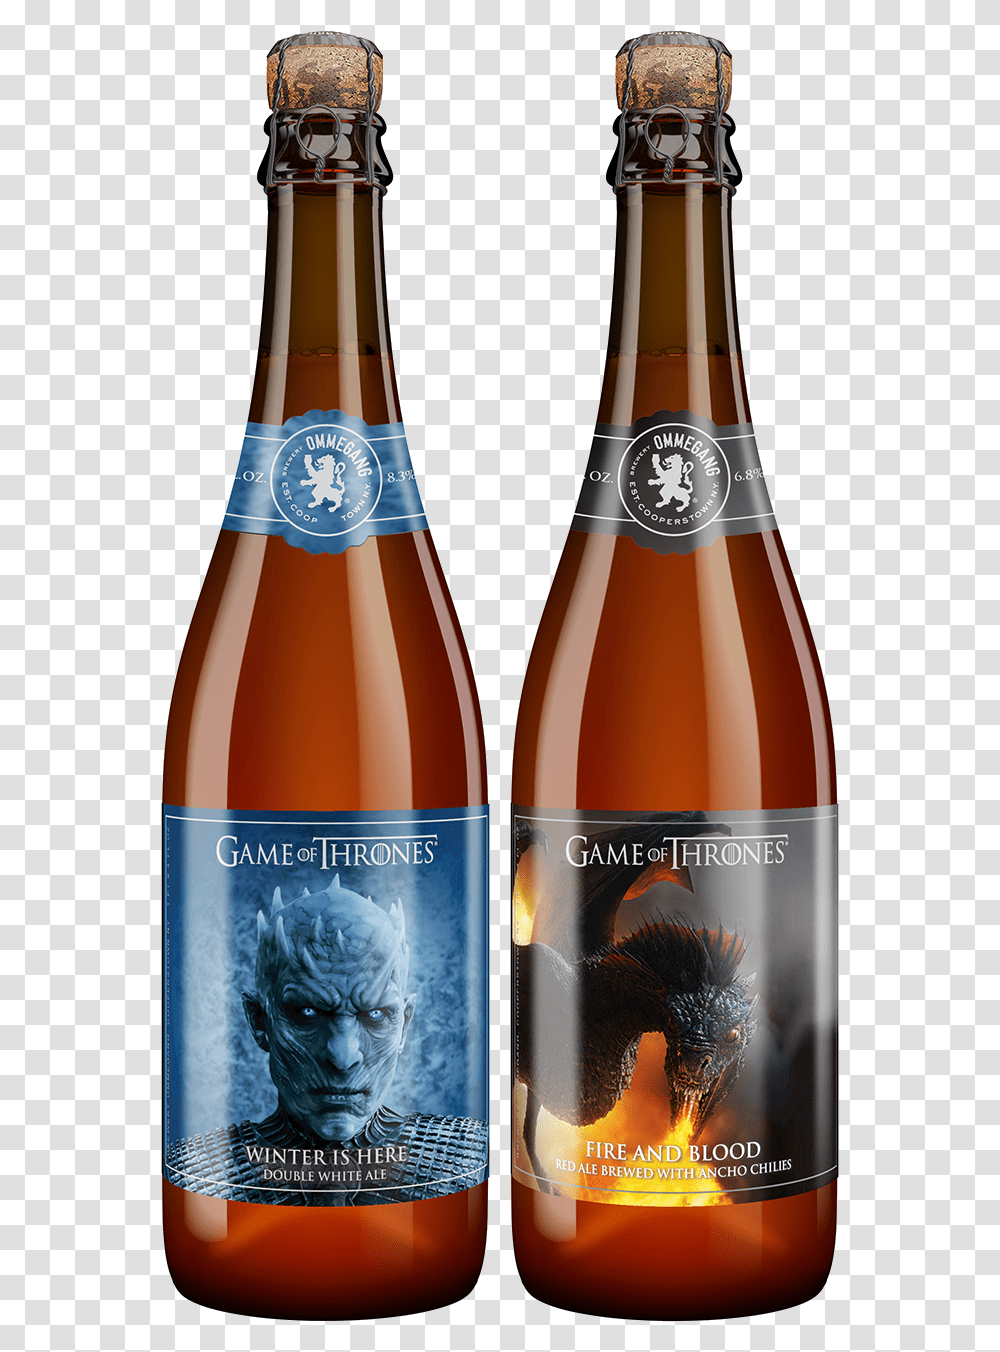 Ommegang Game Of Thrones Fire And Blood 2017 Bottle Ommegang Game Of Thrones Beer, Label, Alcohol, Beverage Transparent Png